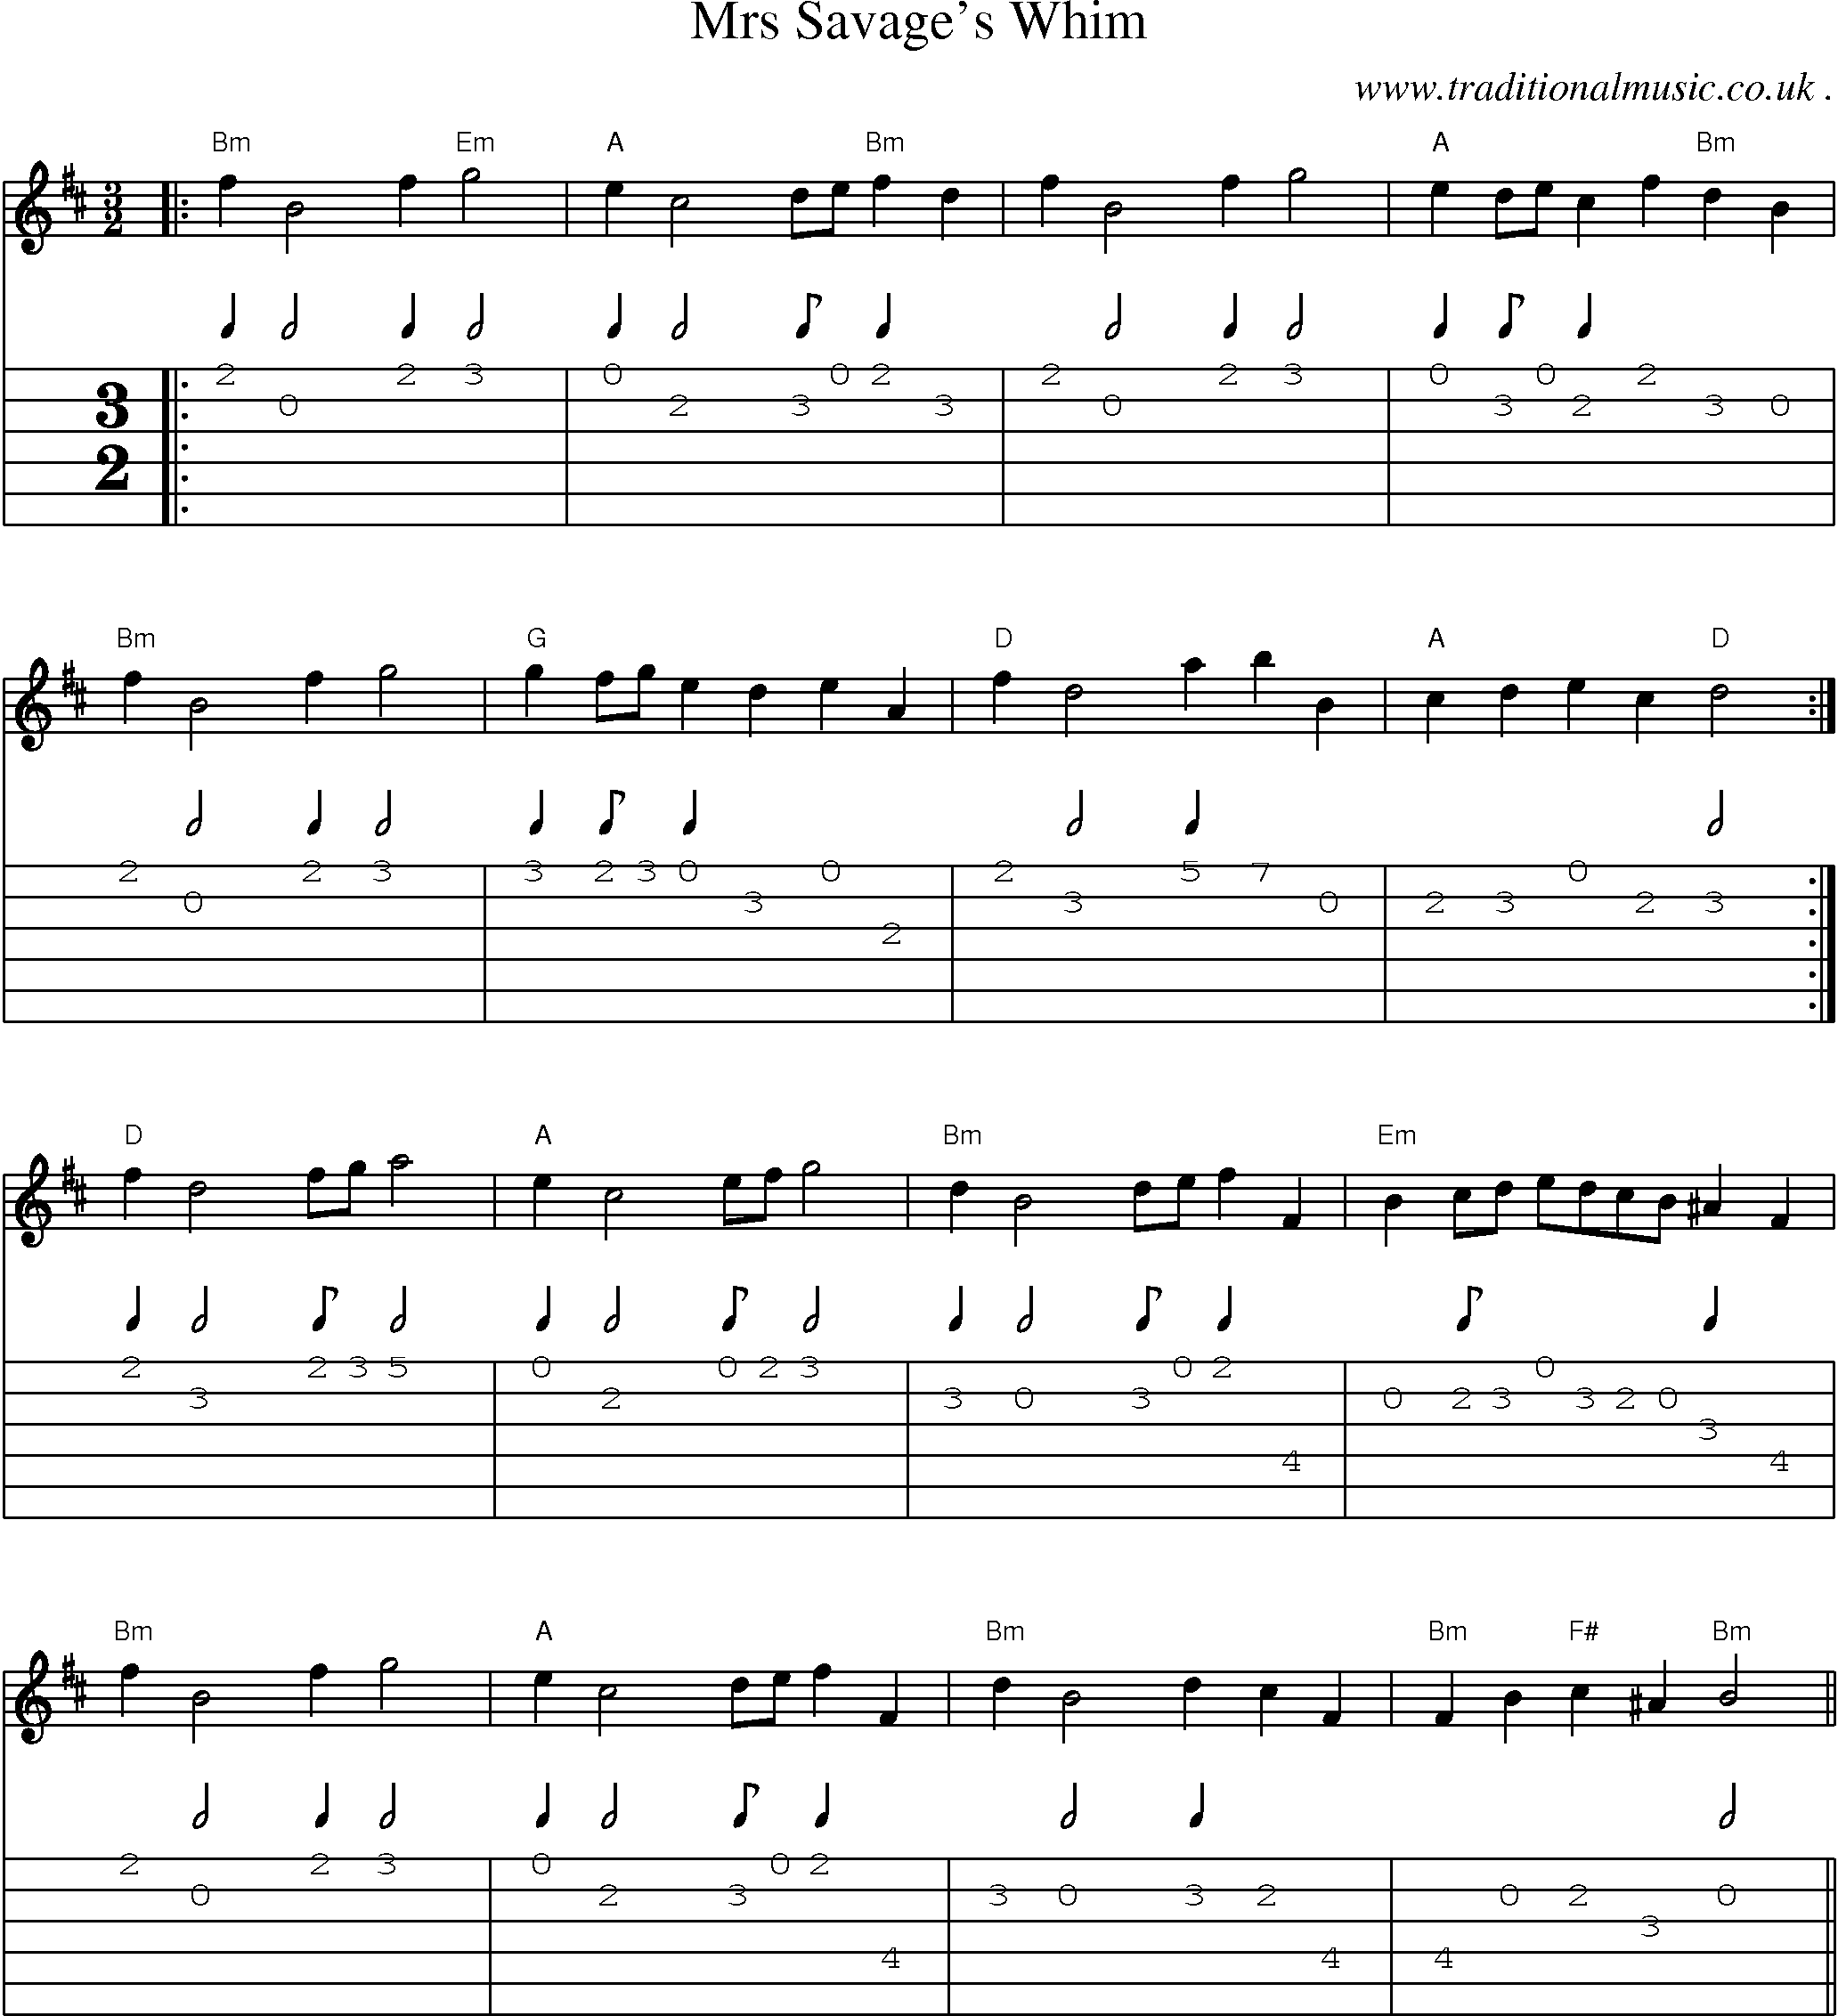 Sheet-Music and Guitar Tabs for Mrs Savages Whim